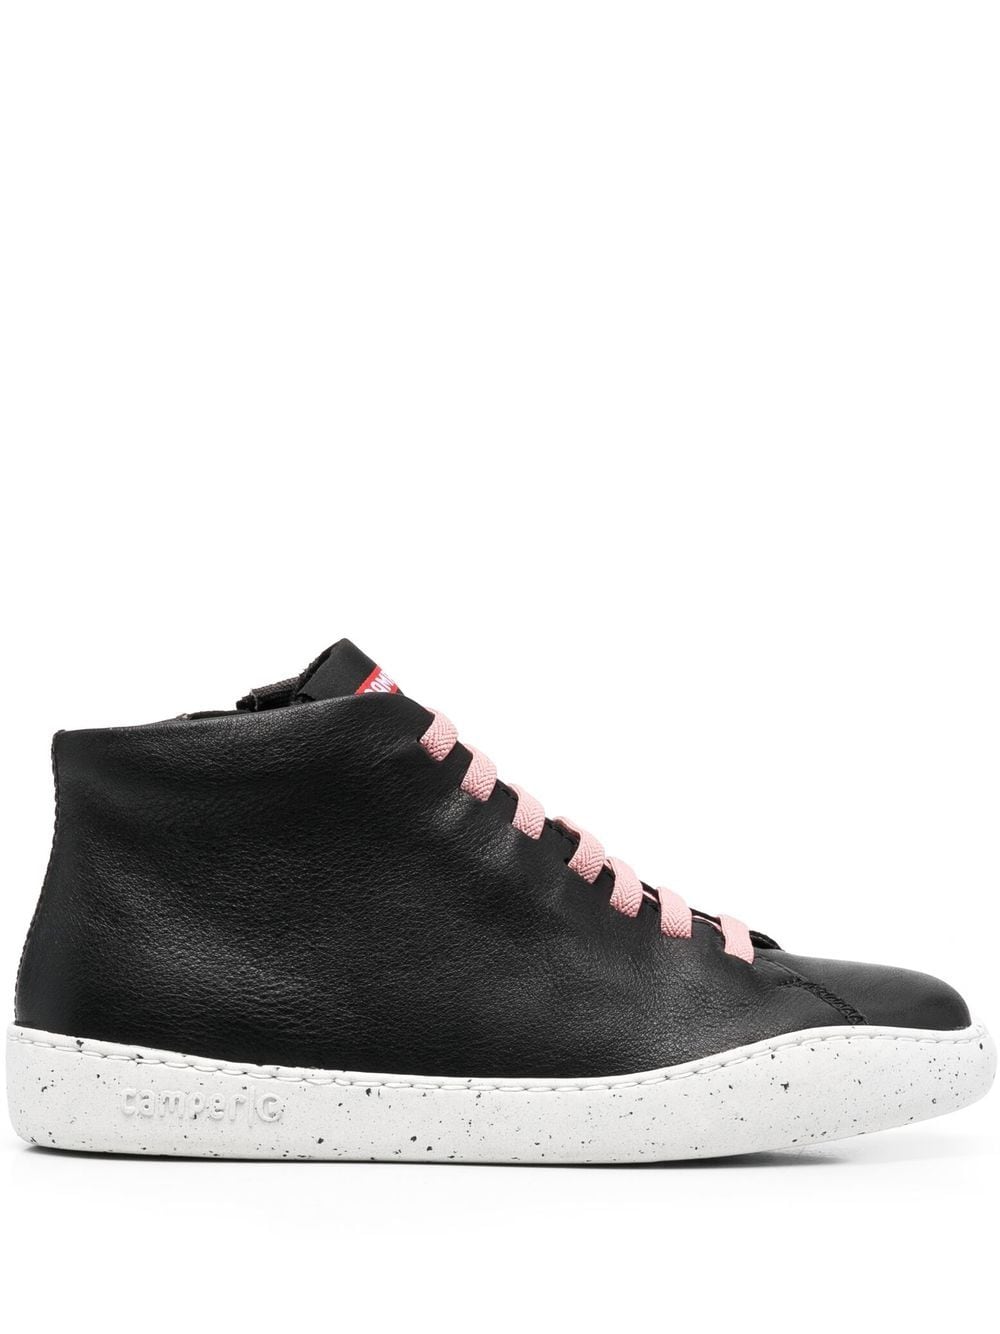 Image 1 of Camper high-top leather sneakers